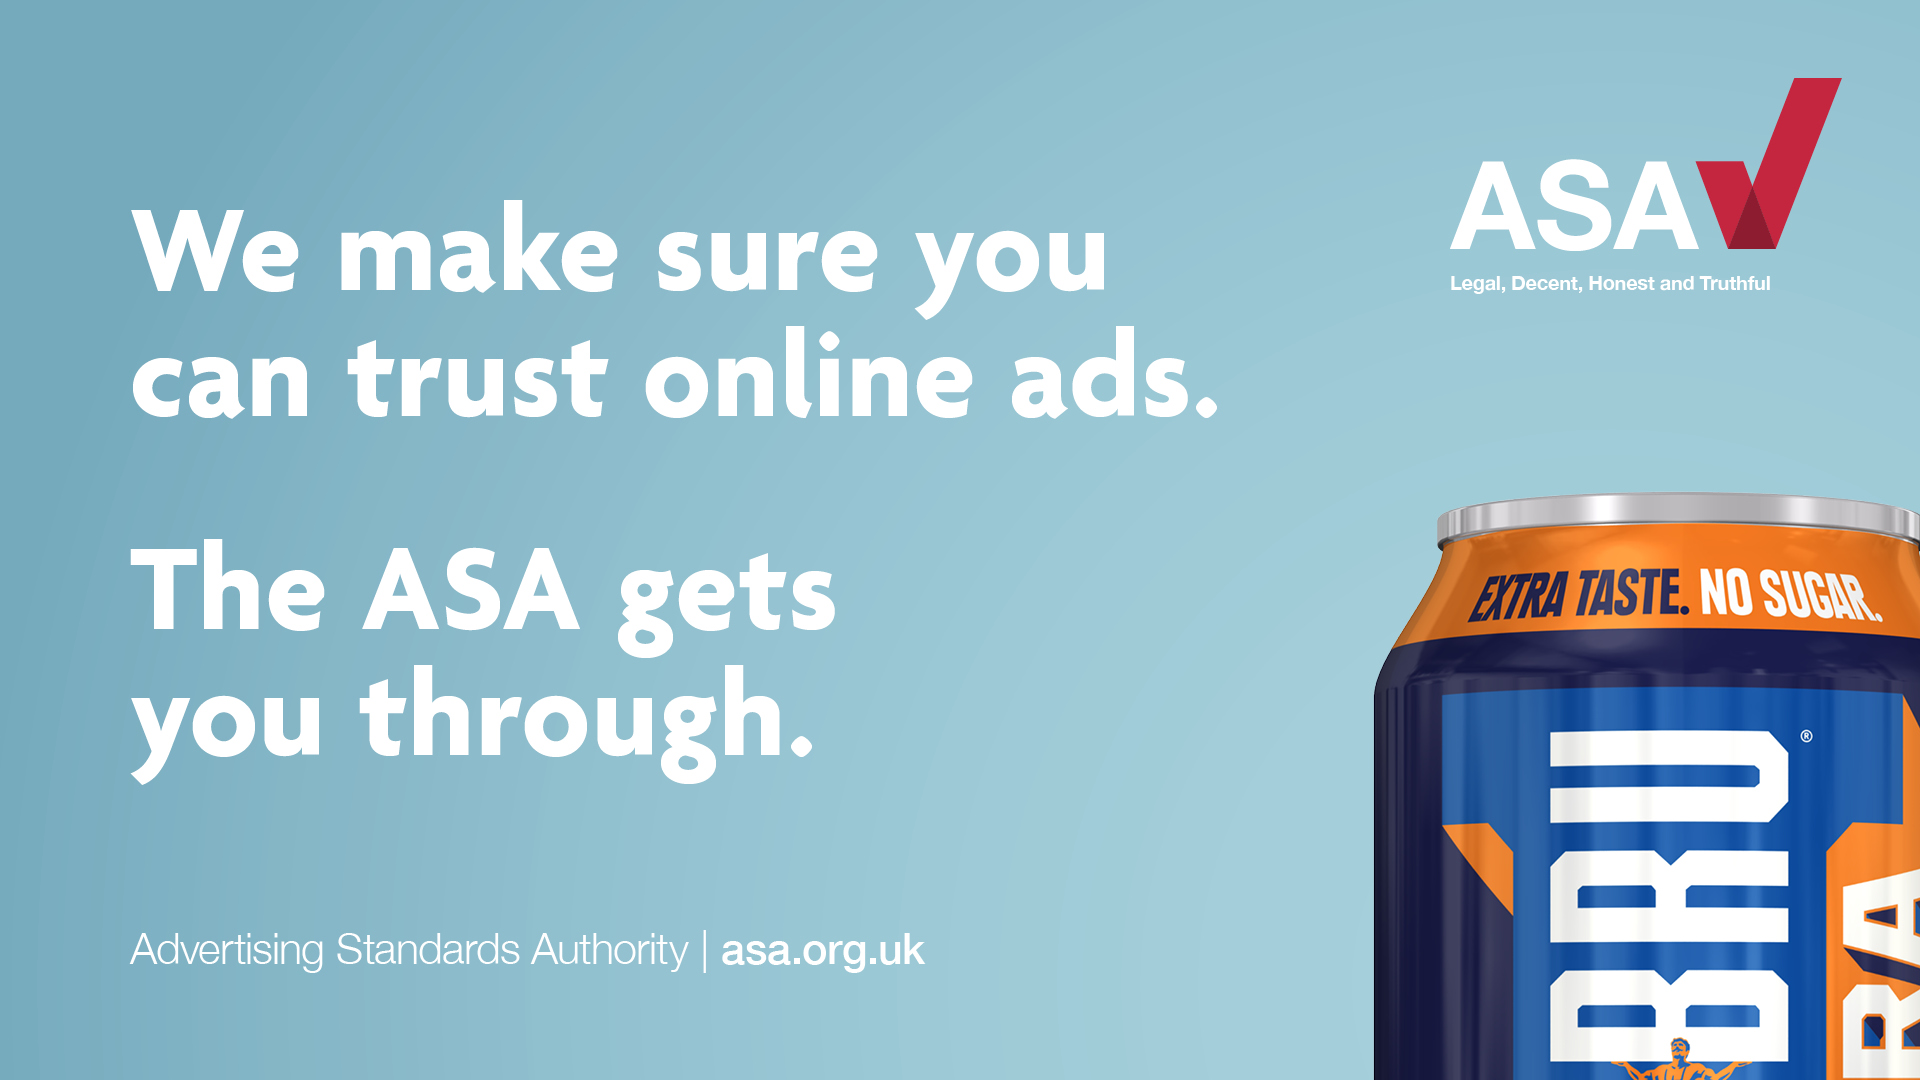 ASA and Irn Bru national ad campaign image